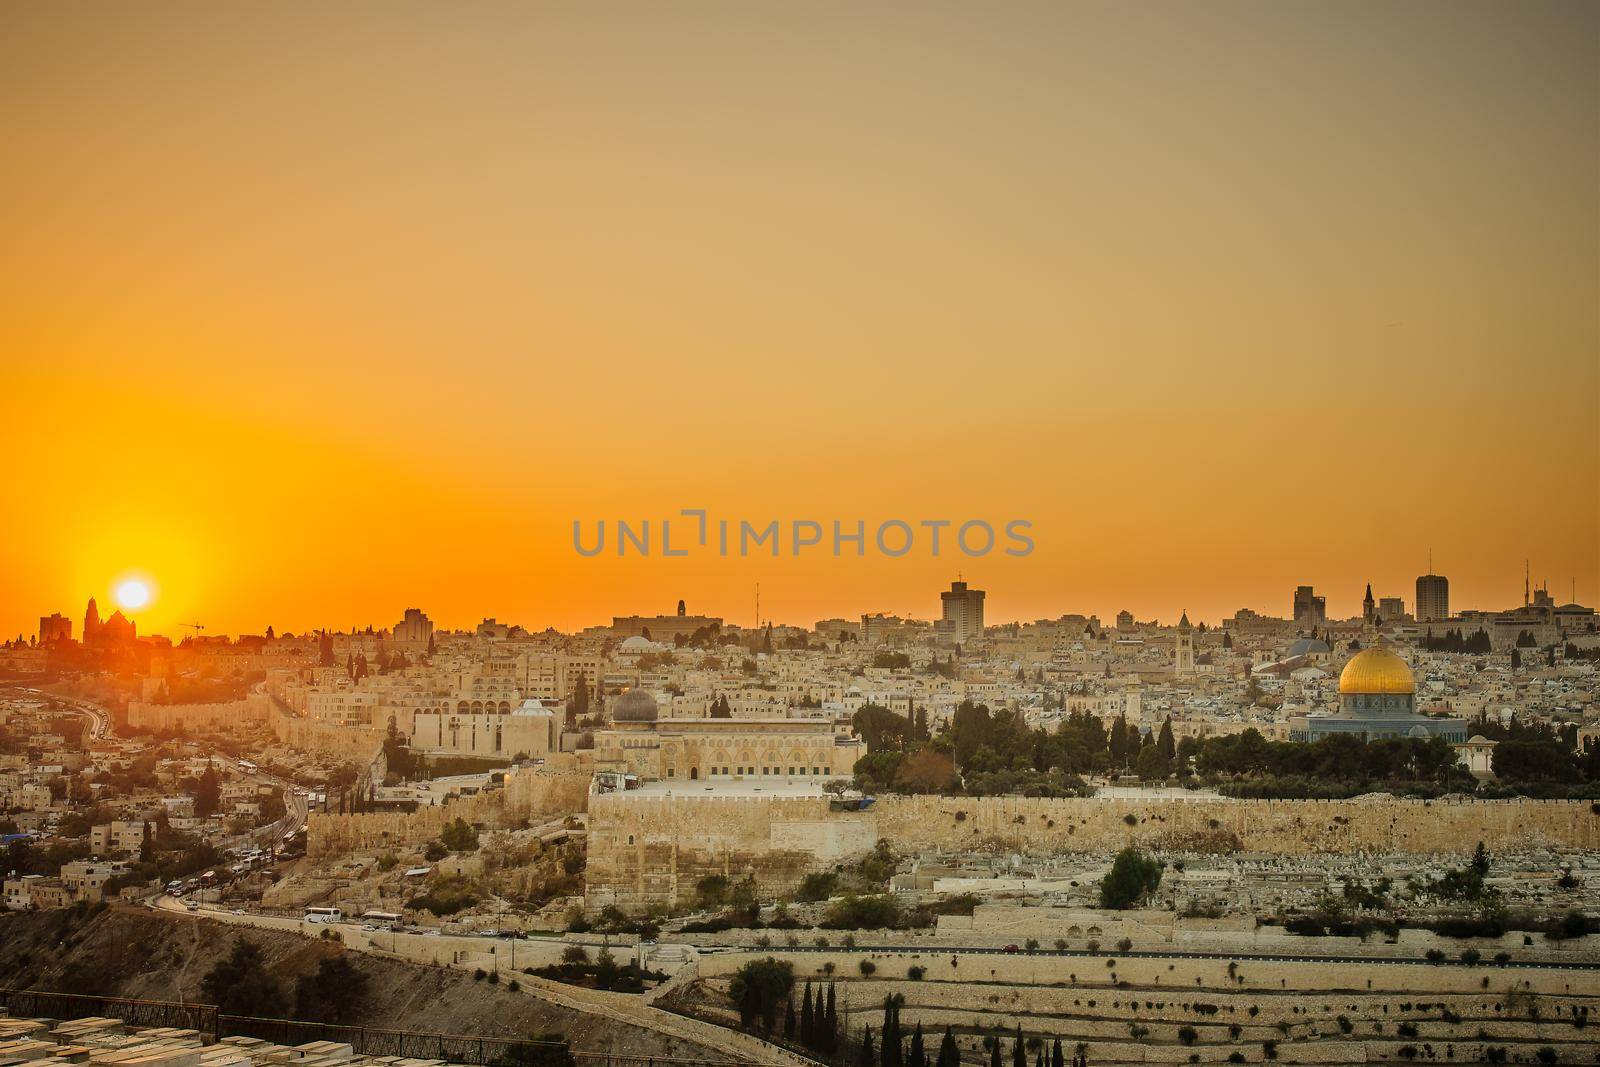 Sunset view of the old city of Jerusalem, with the temple mount and al-Aqsa mosque. Israel